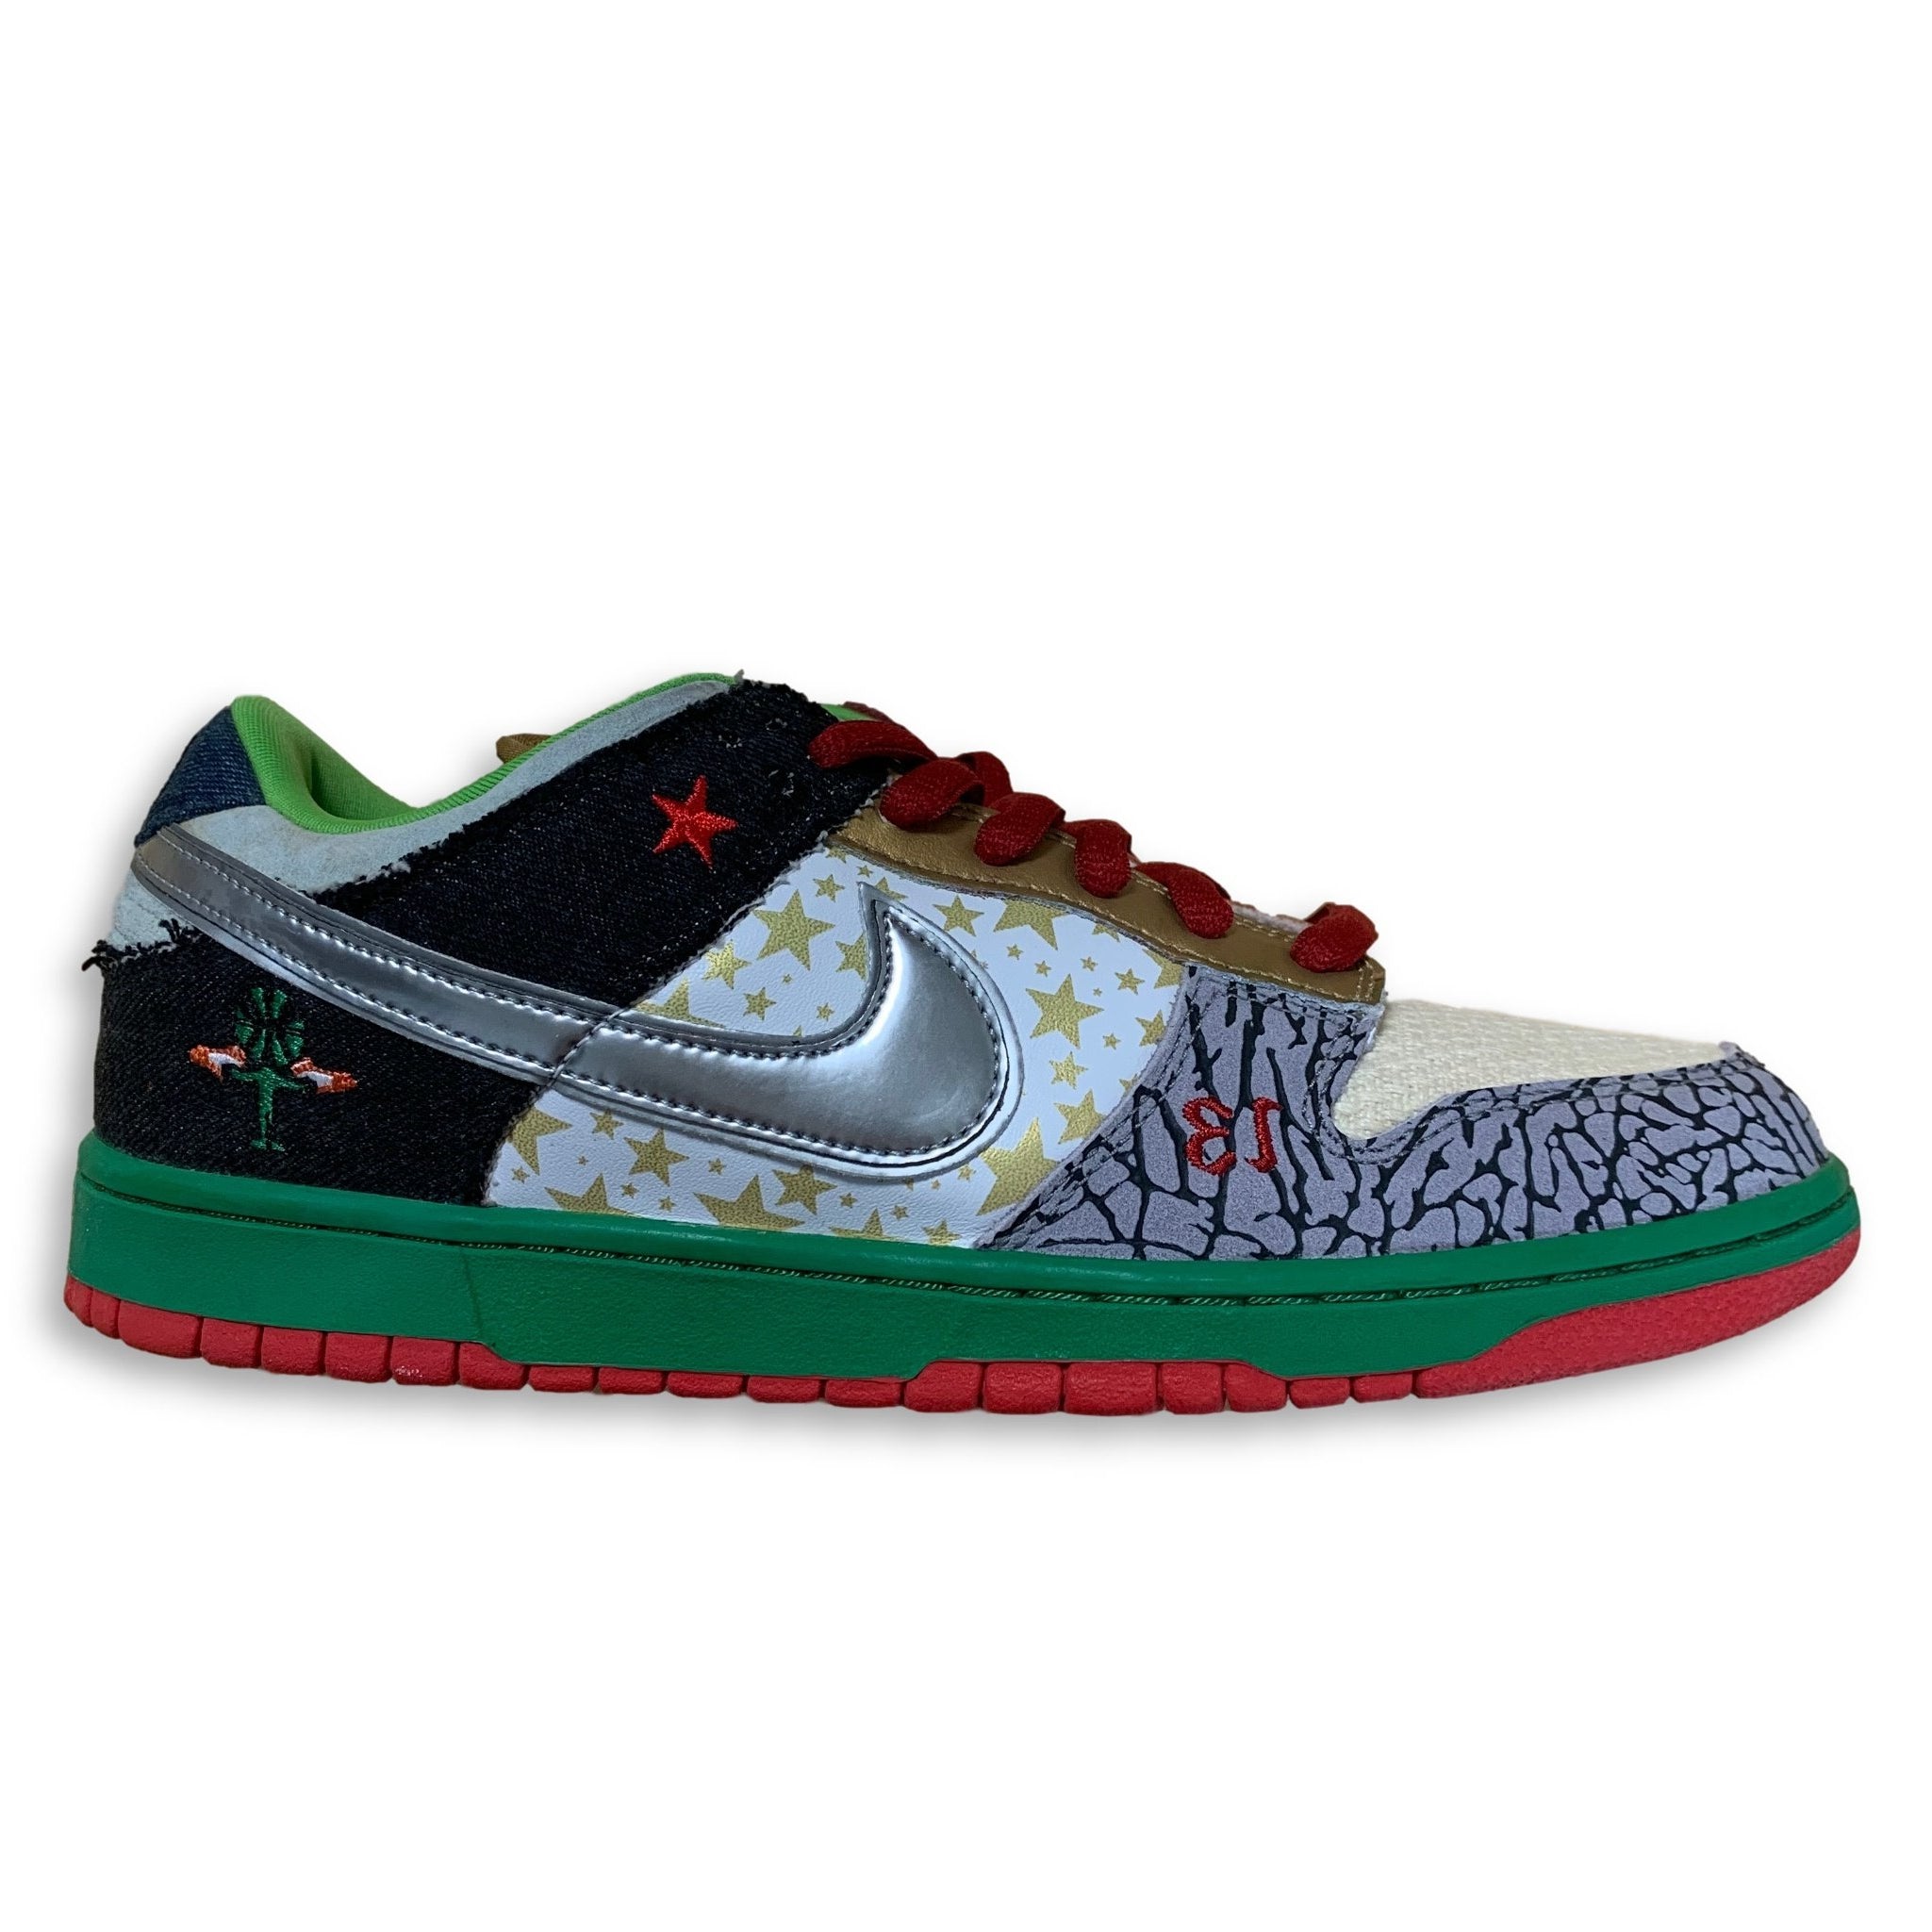 Nike Dunk Low Pro SB "What The Dunk" - Size 10 - NEW